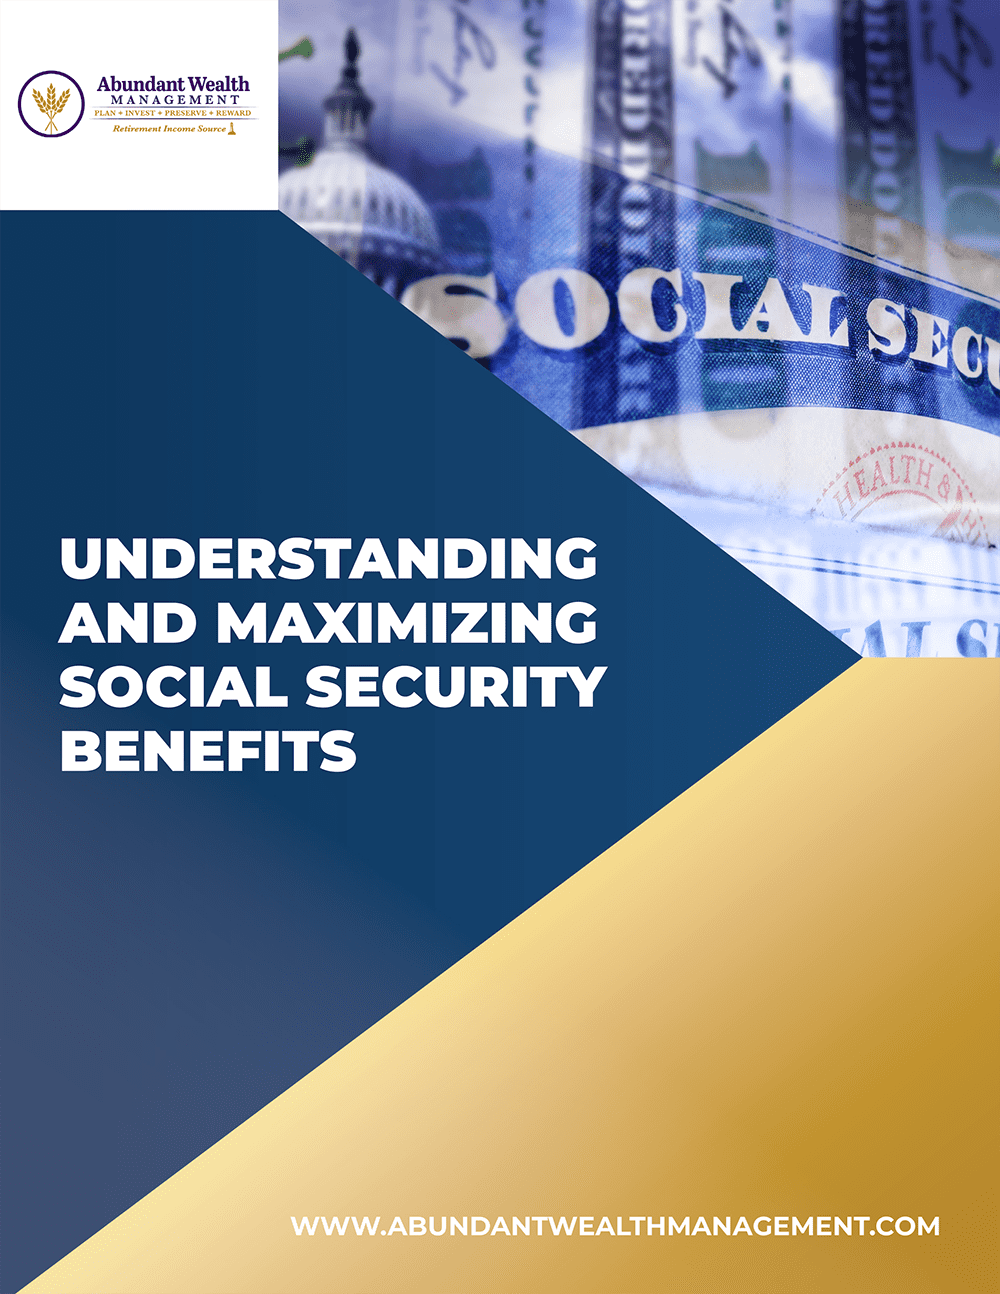 Abundant Wealth Management - Understanding and Maximizing Your Social Security Benefits-1